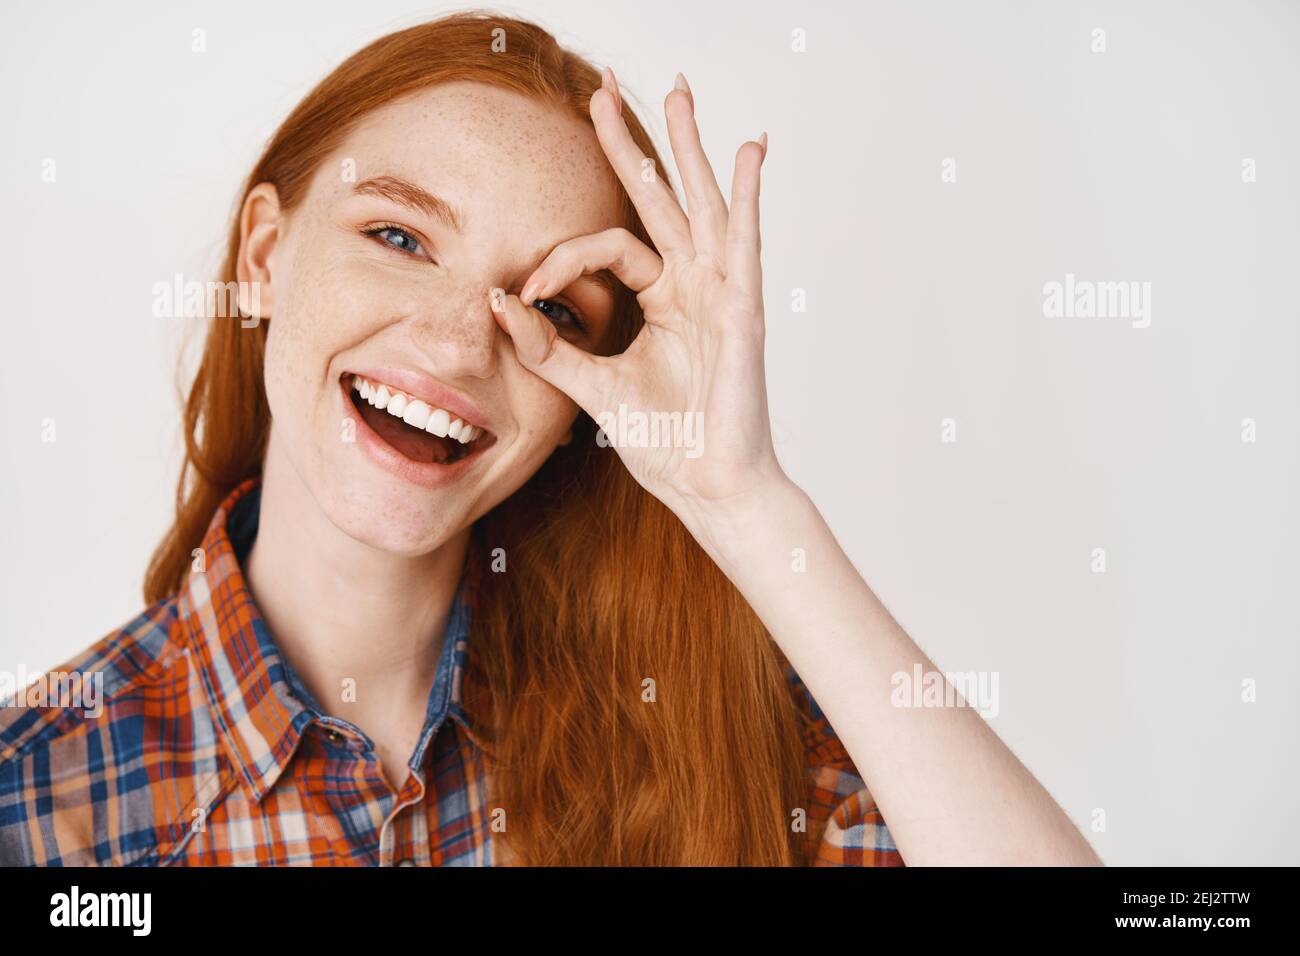 Close-up of happy redhead woman with pale skin and white teeth, showing okay sign on eye and smiling, standing against white background Stock Photo